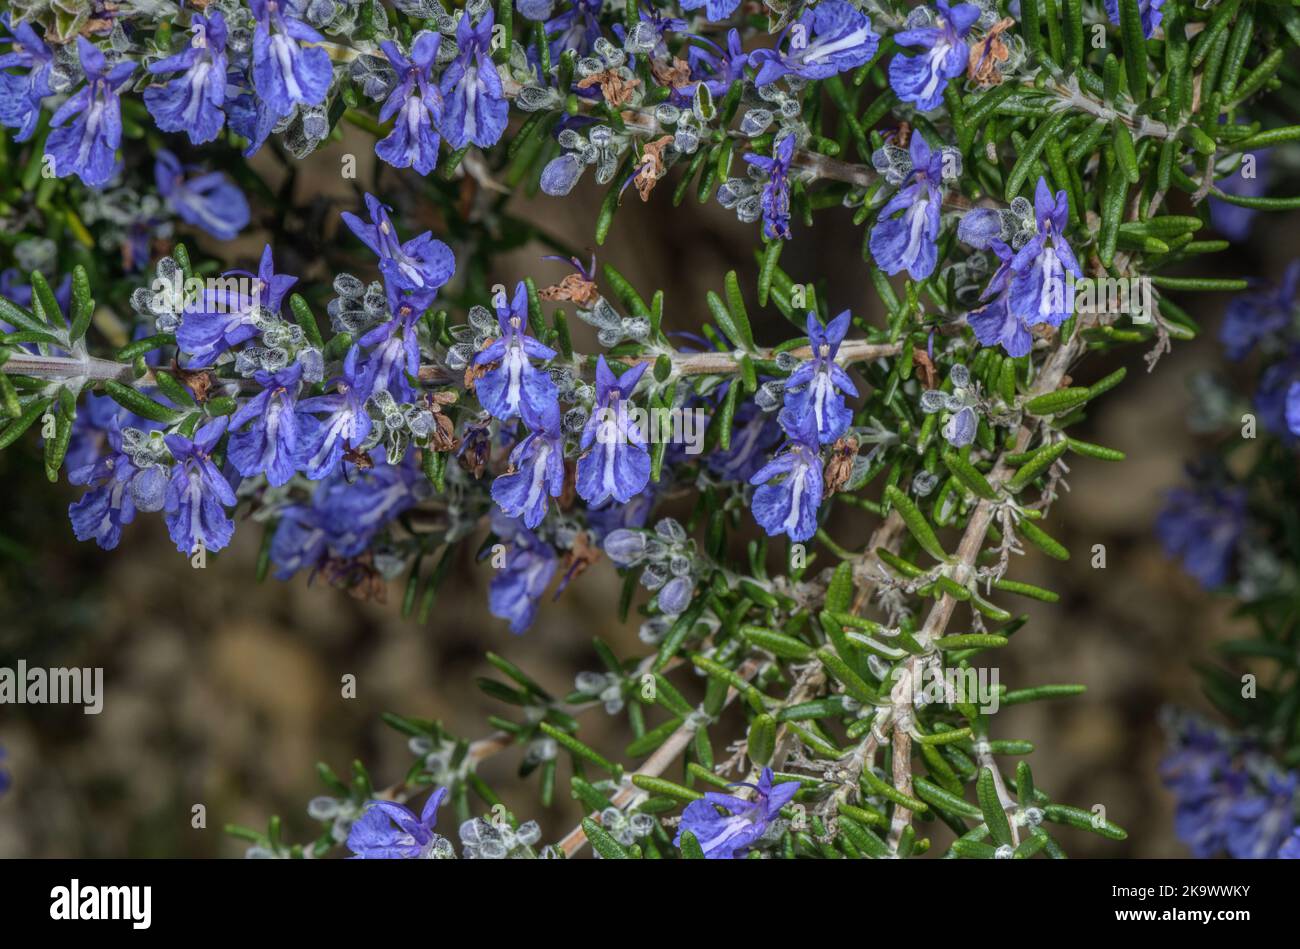 A garden variety of Rosemary, Rosmarinus officinalis 'McConnell's Blue' in culti=vation. Stock Photo